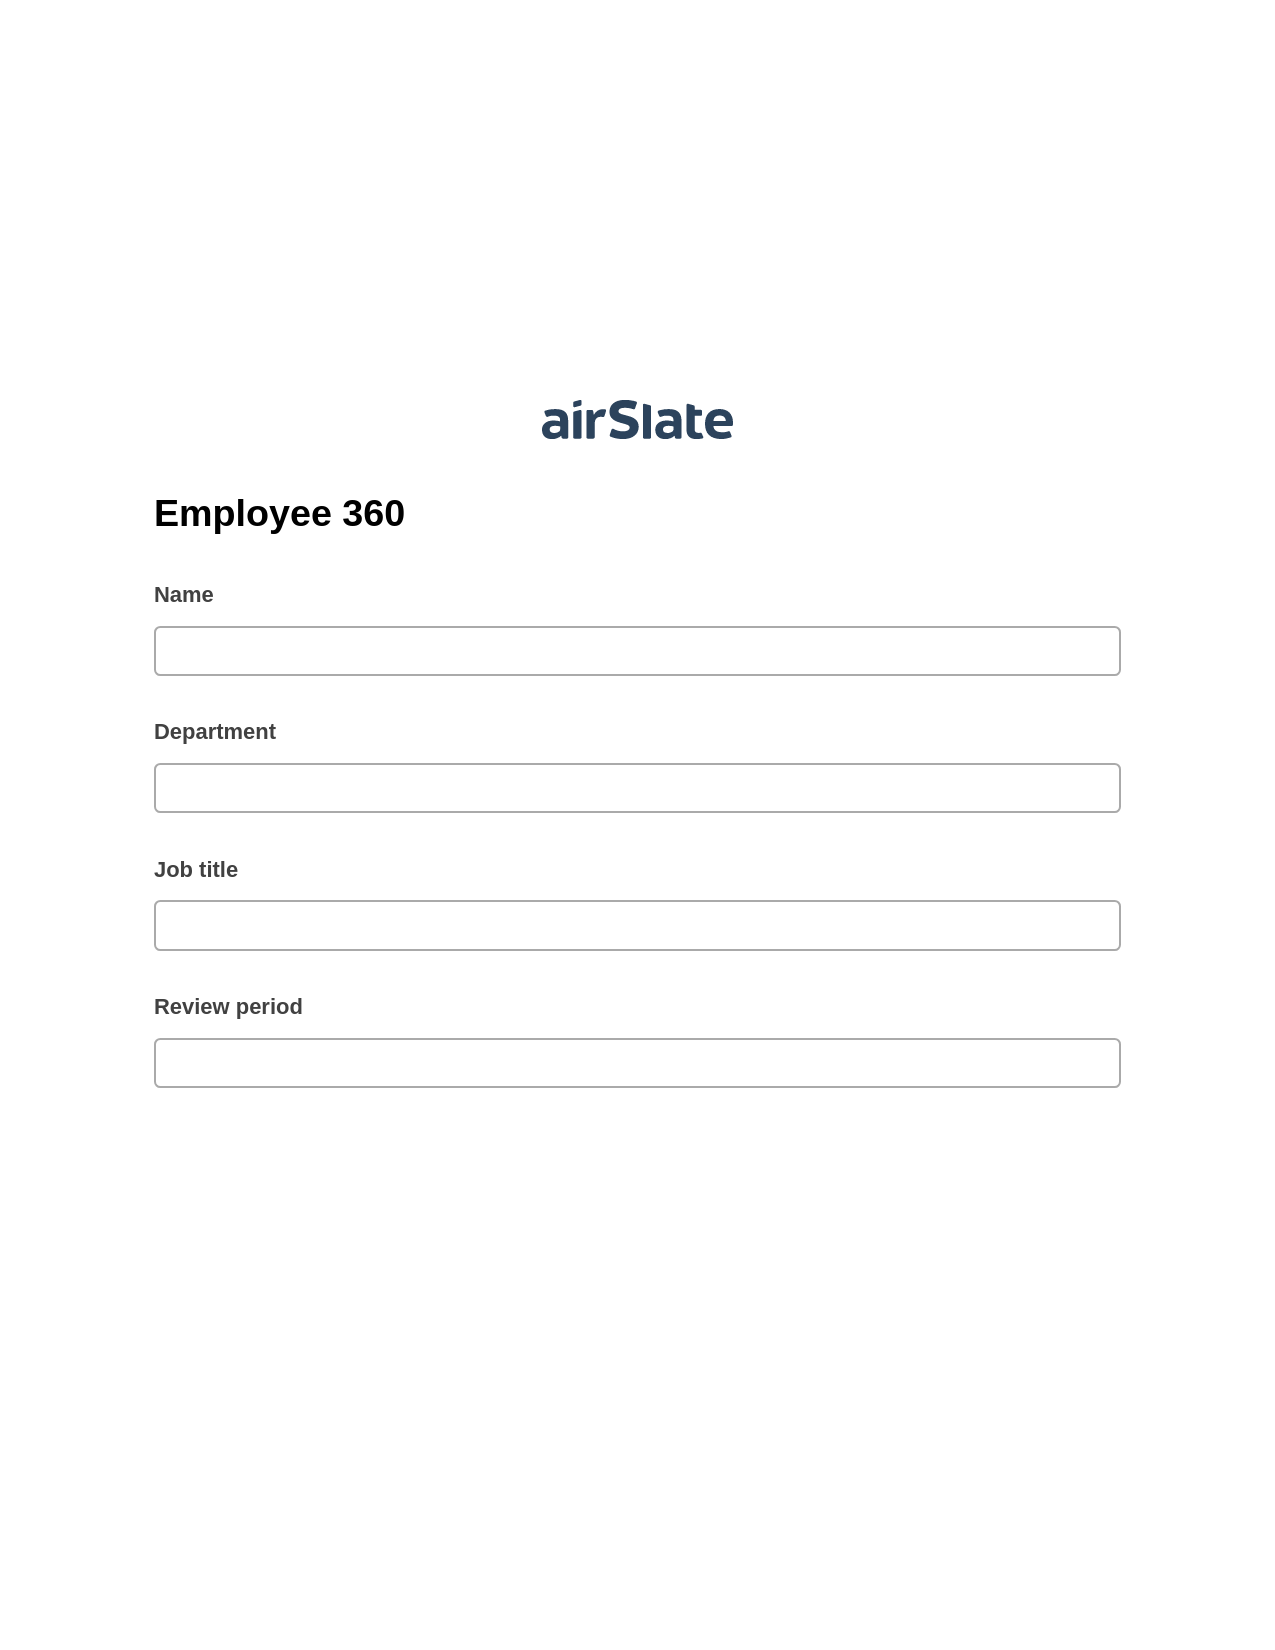 Employee 360 Pre-fill from Salesforce Records Bot, Update MS Dynamics 365 Record Bot, Export to NetSuite Bot